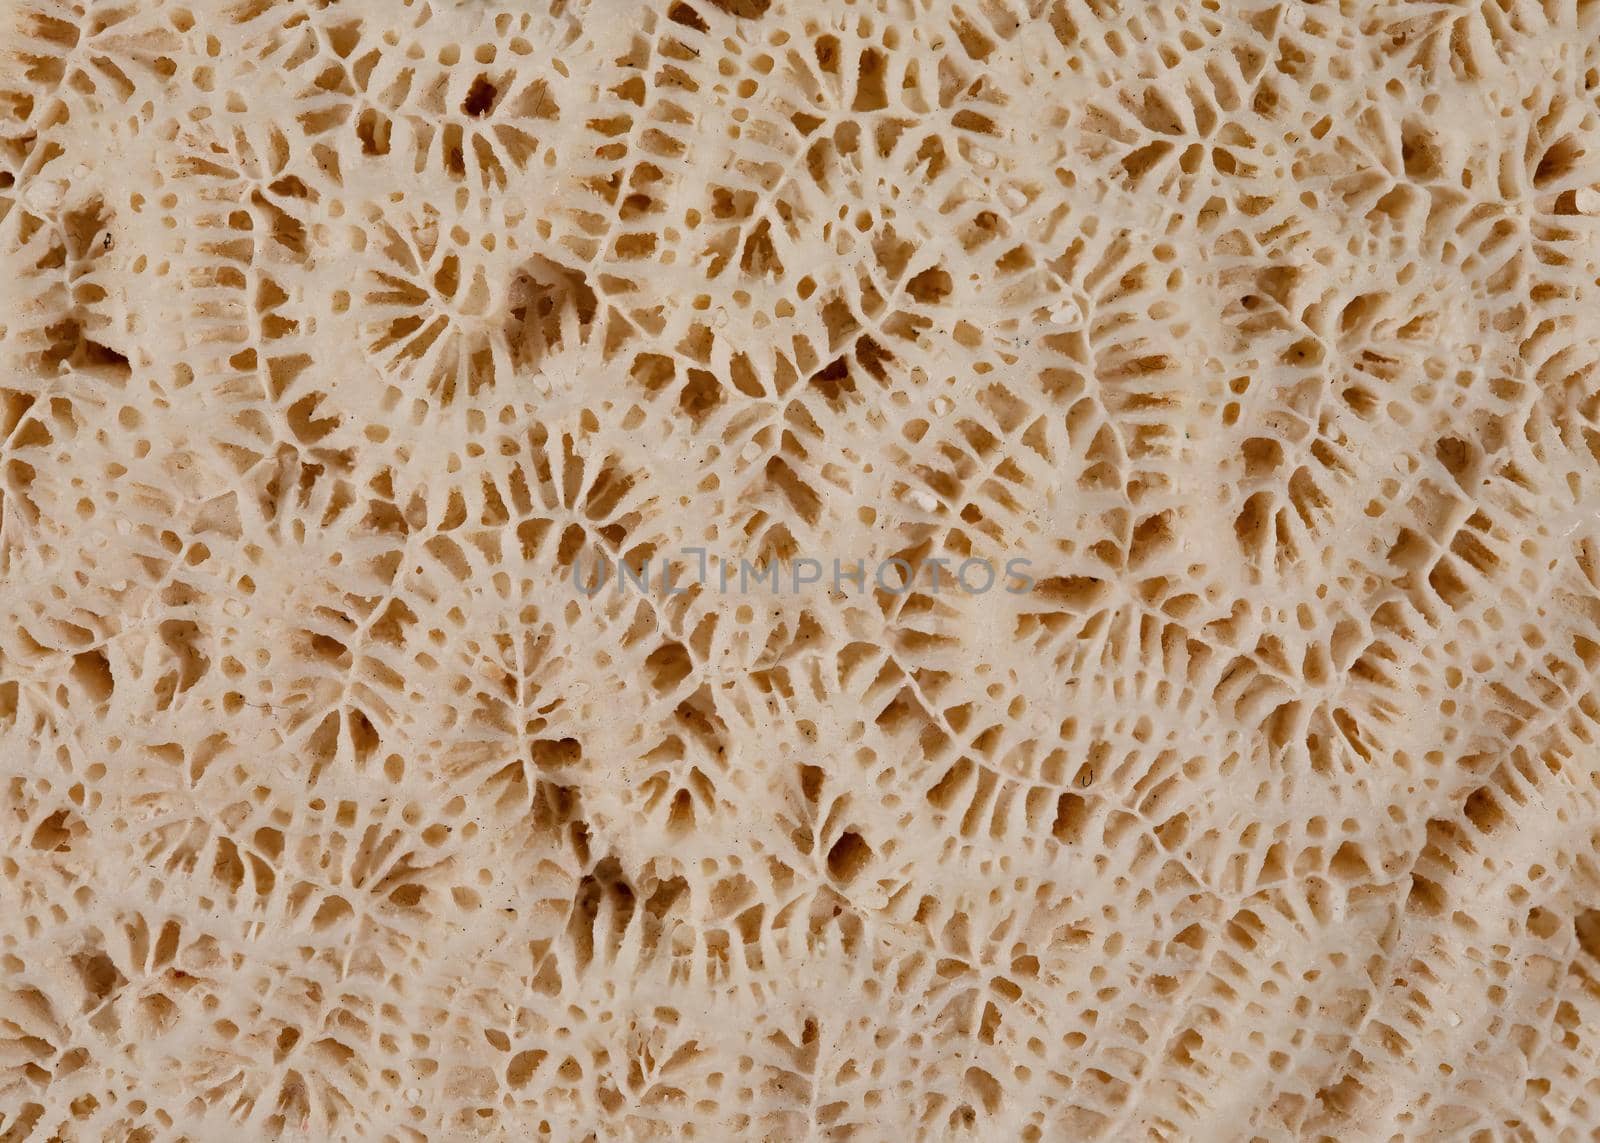 Macro View of a Brain Coral by CharlieFloyd